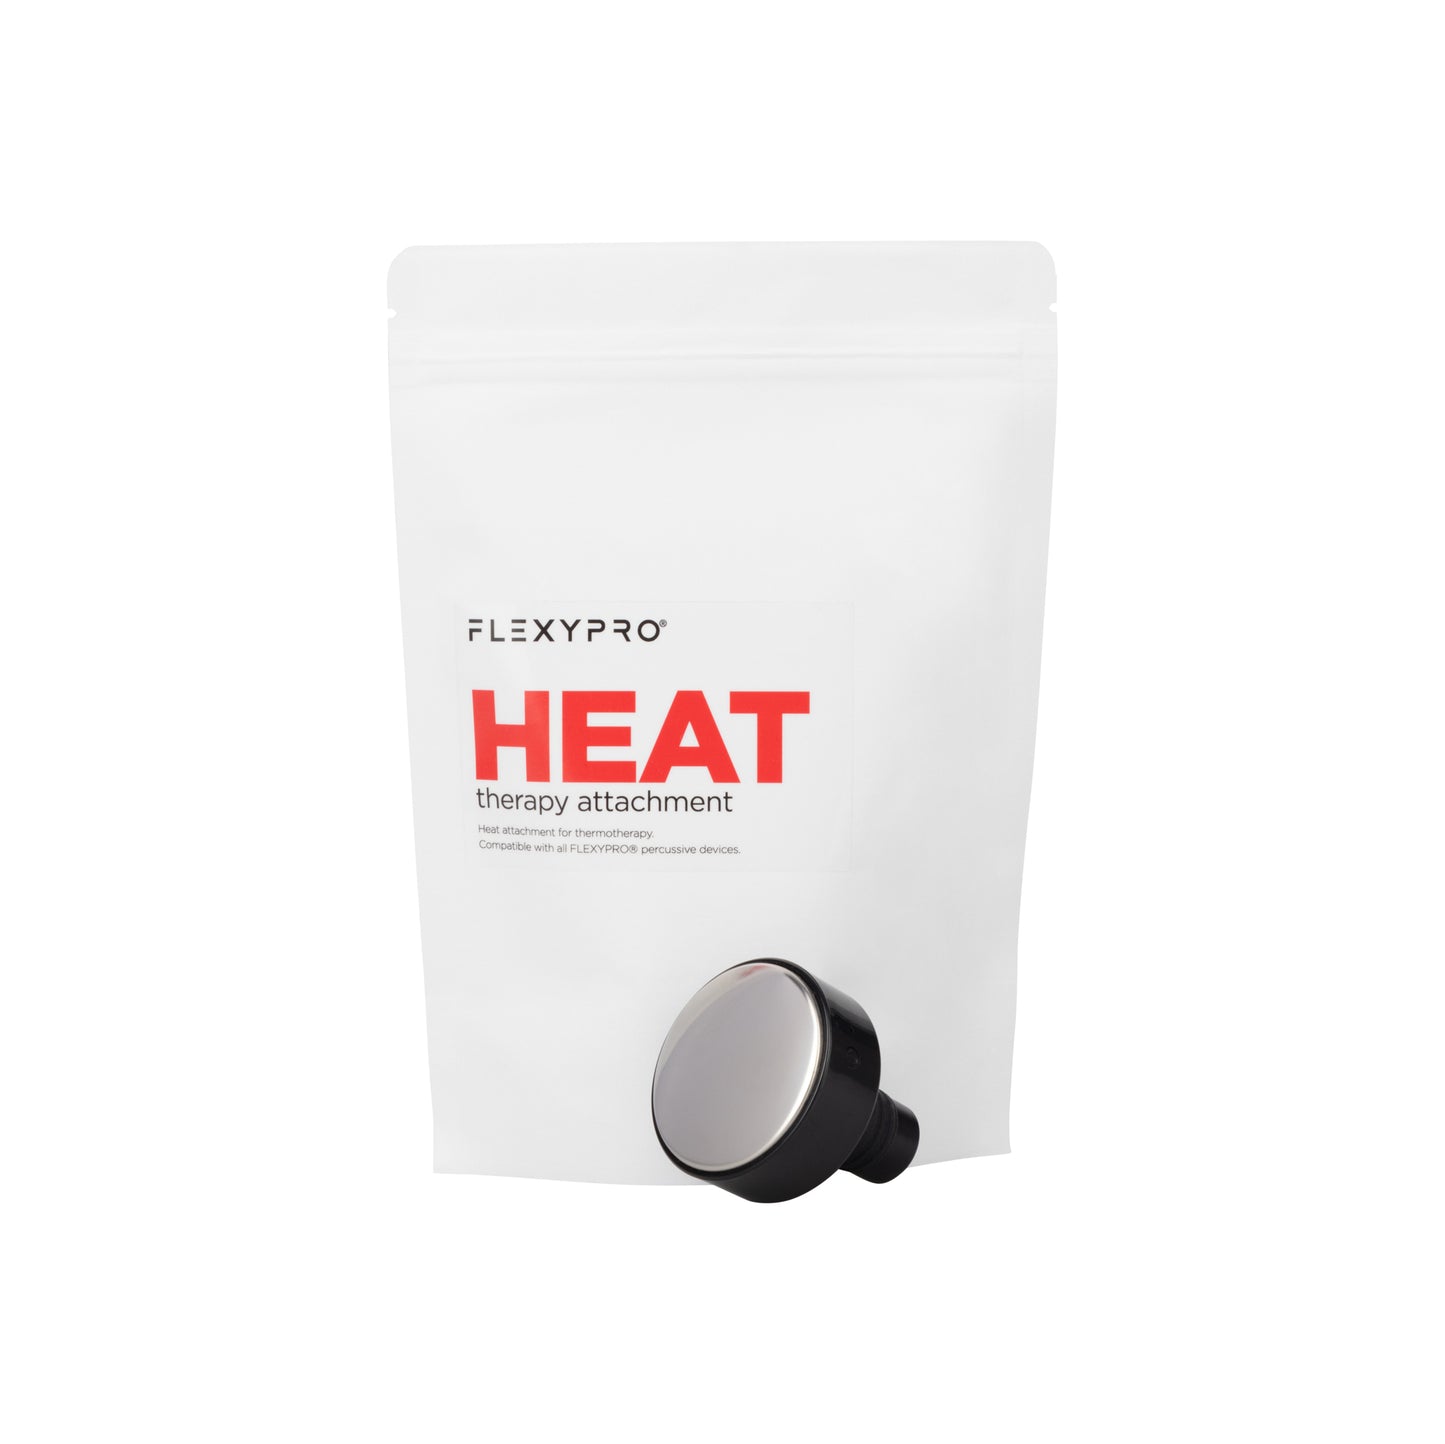 FLEXYPRO® Heat Attachment for Thermotherapy